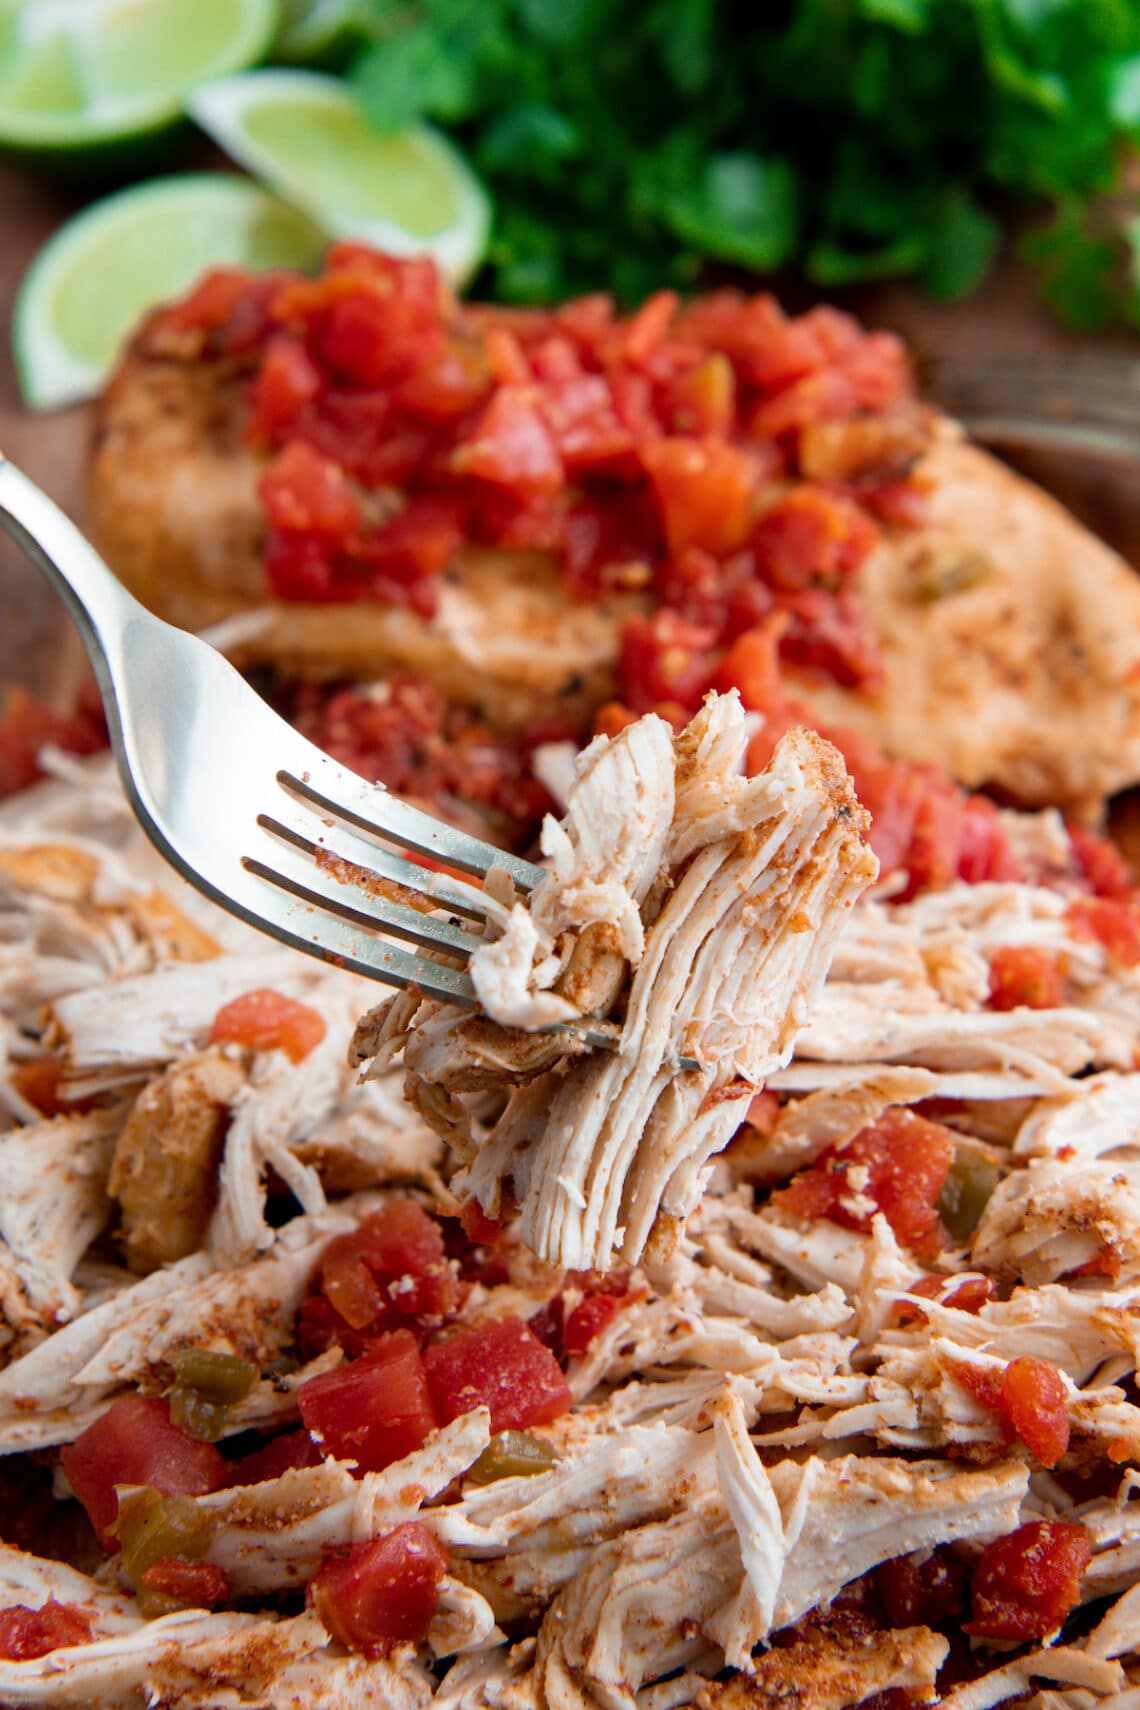 Shredded chicken with tomatoes on a cutting board with a fork picking up a piece of shredded chicken.